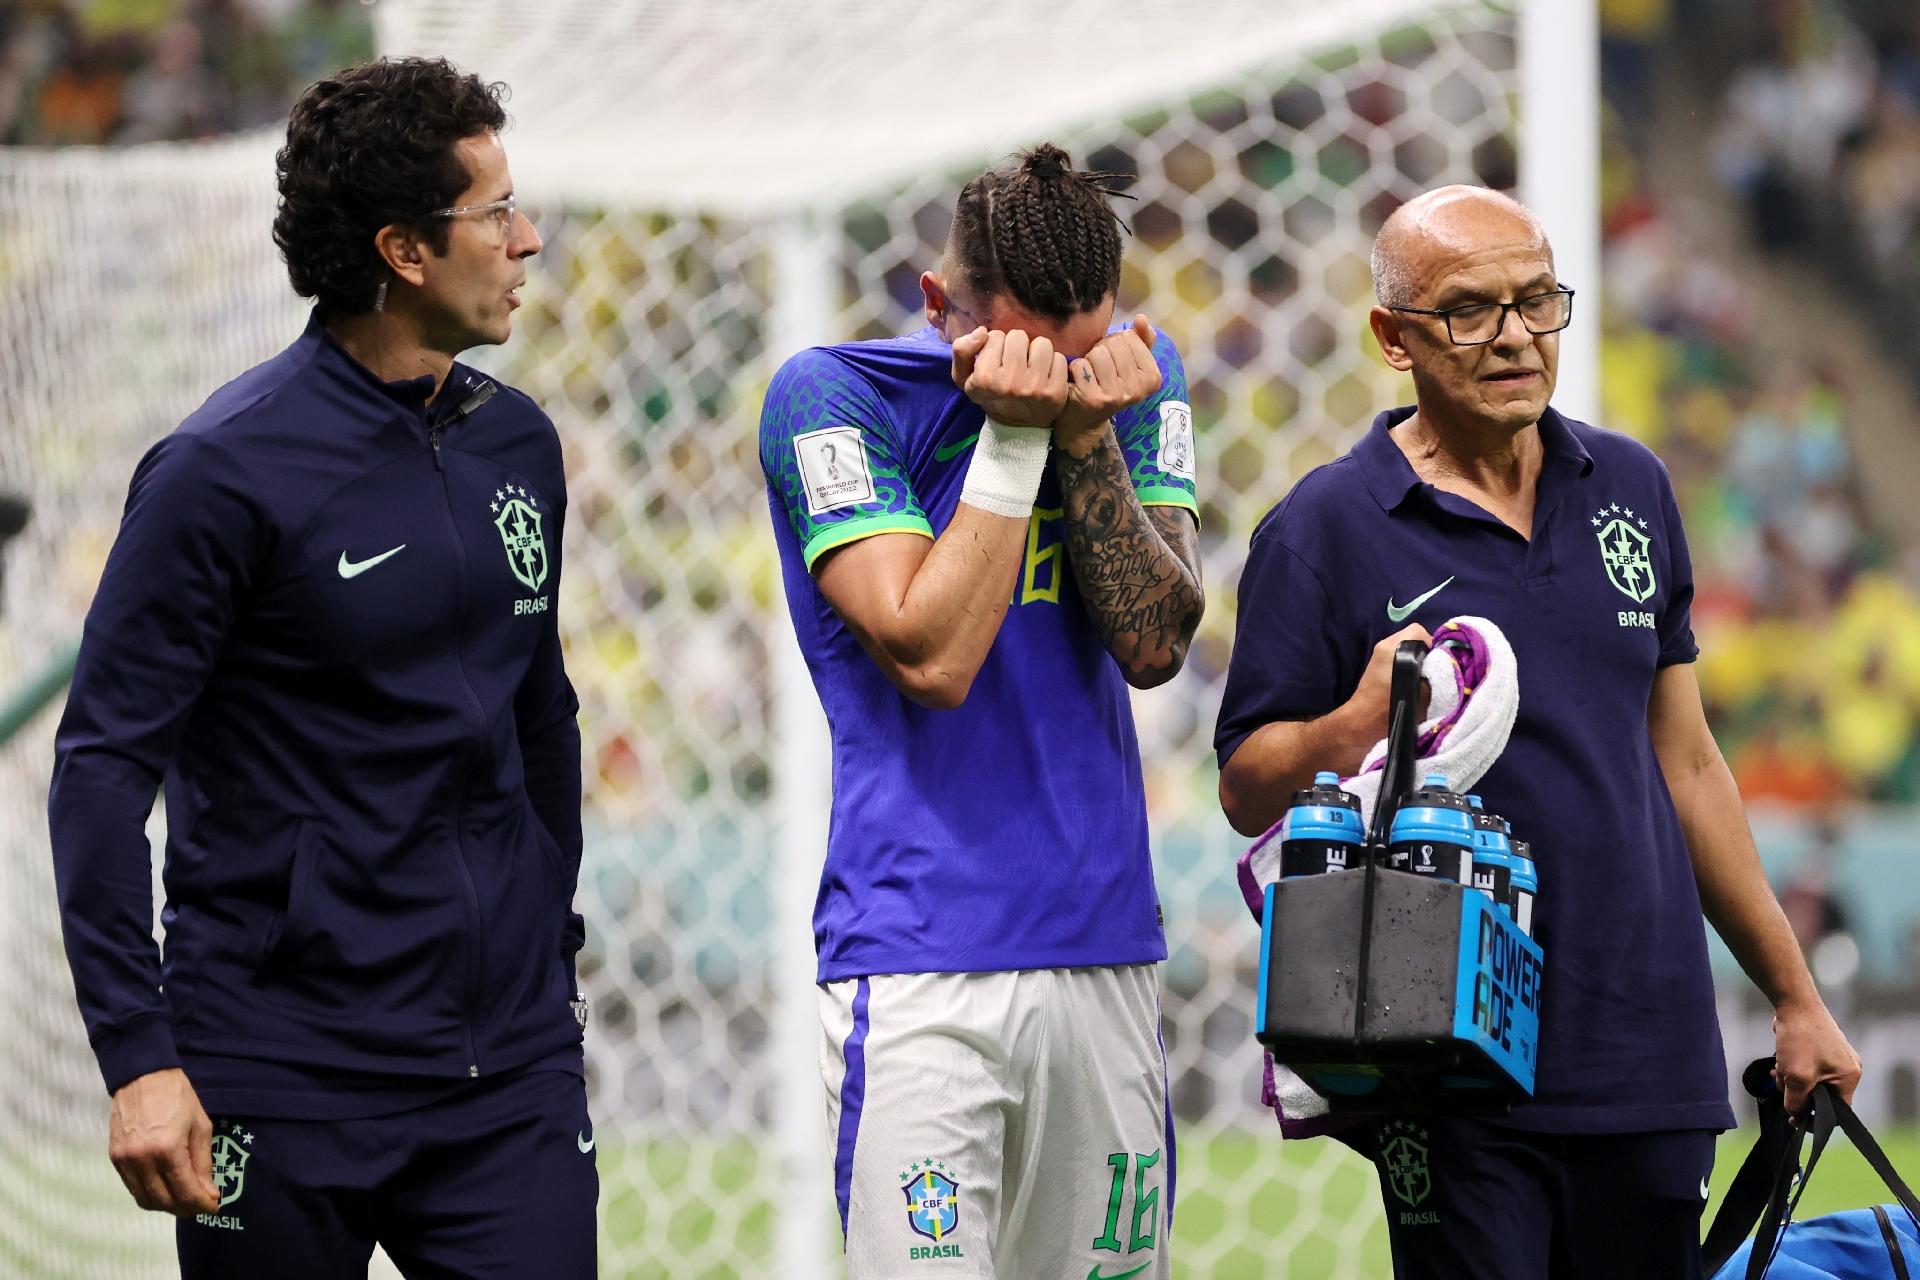 Alex Telles cries as he is substituted for injury in the duel between Cameroon and Brazil - Clive Brunskill/Getty Images